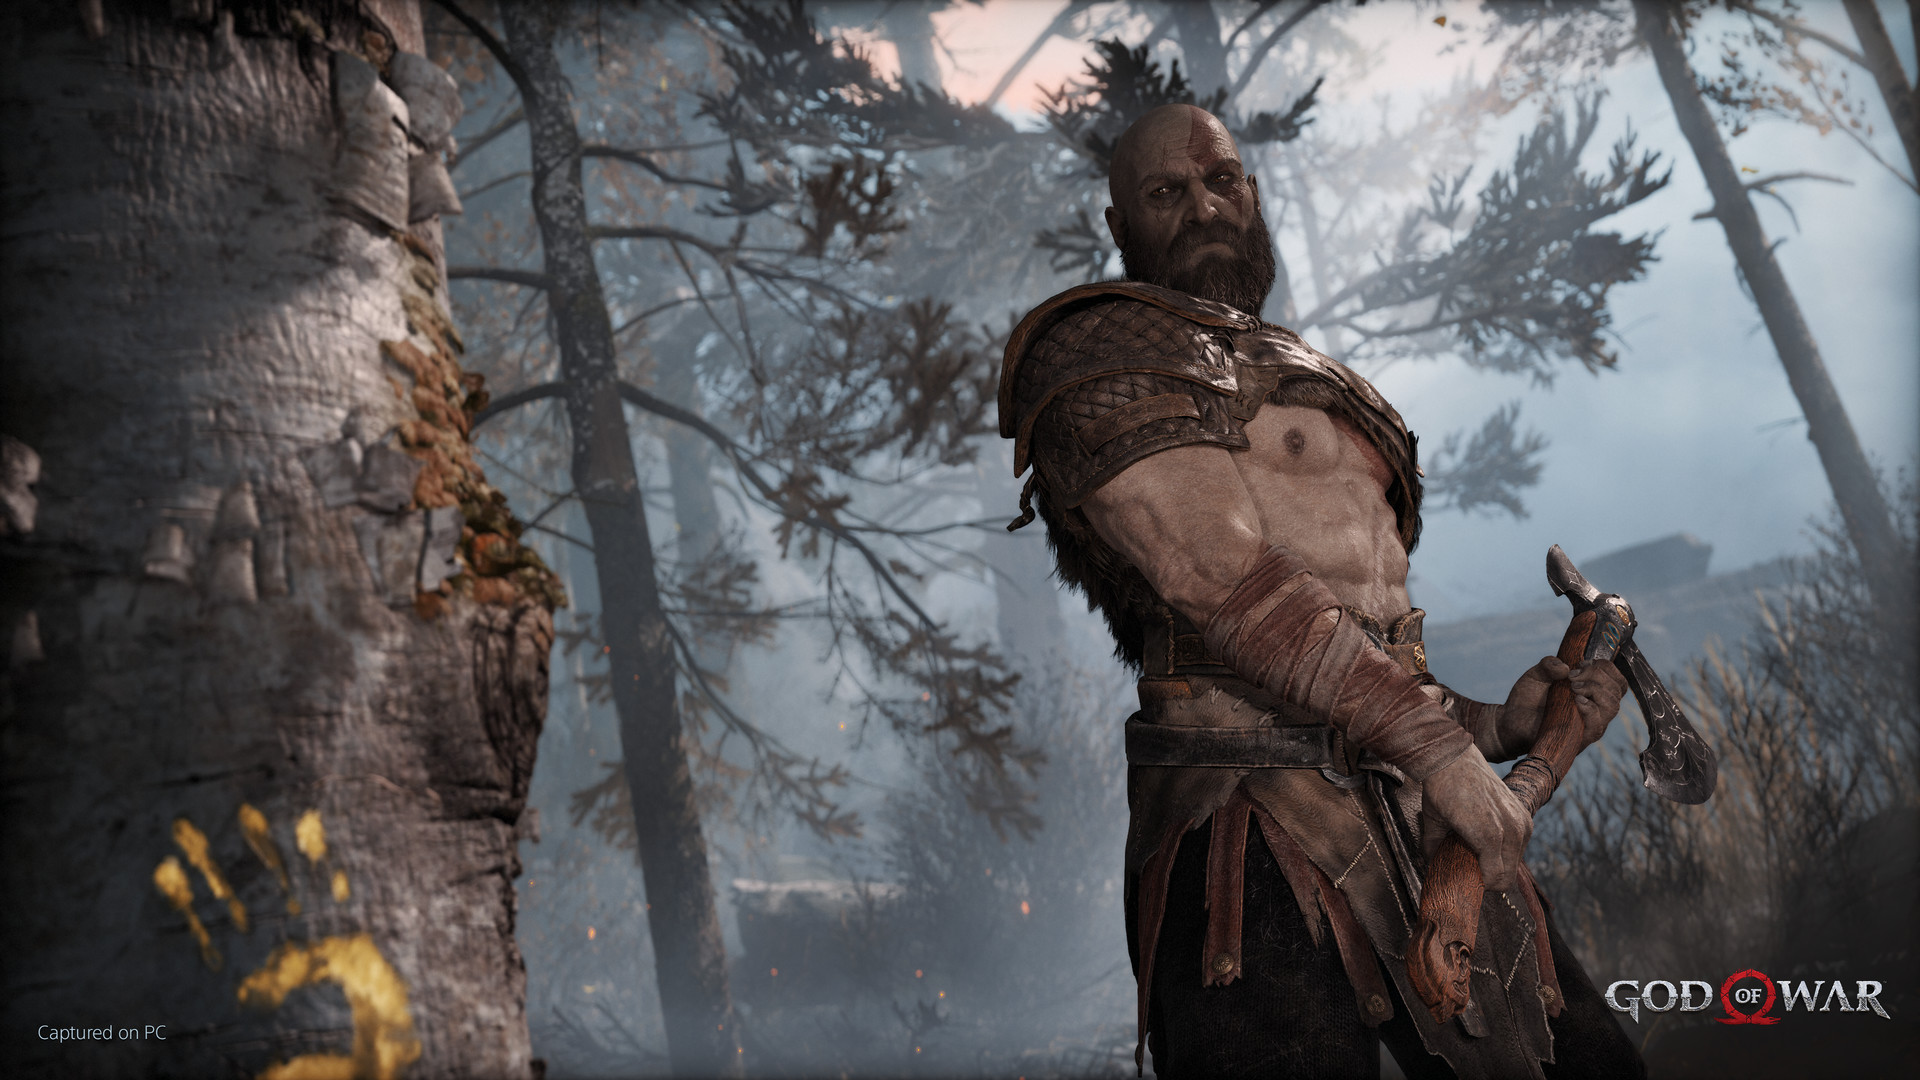 God of War (2018) is coming to PC – PlayStation.Blog